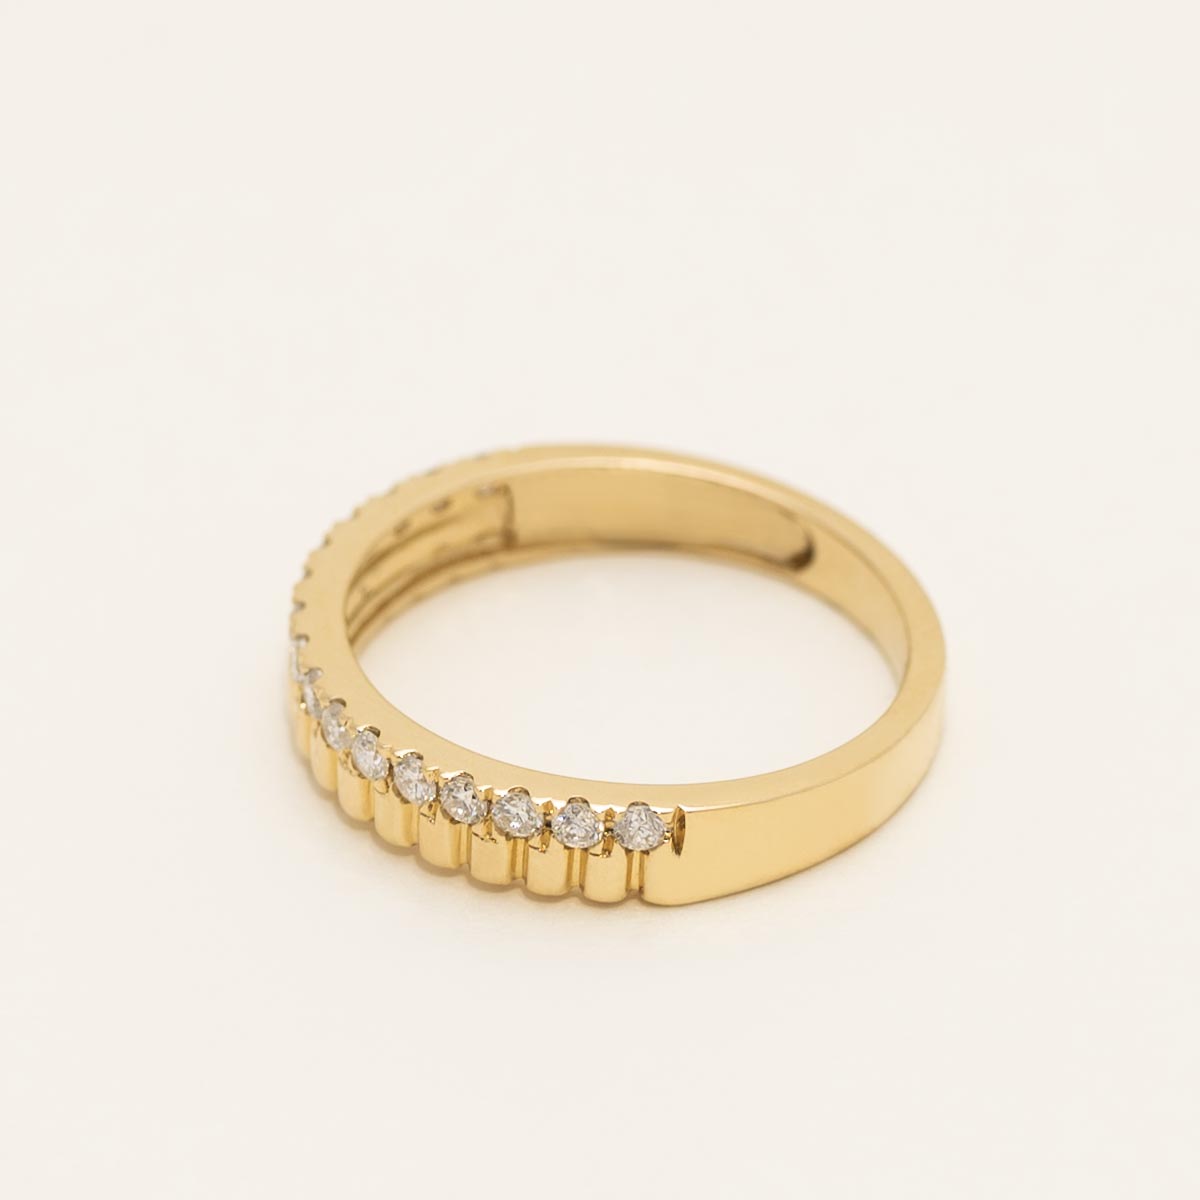 Diamond Fashion Ring in 14kt Yellow Gold (1/4ct tw)